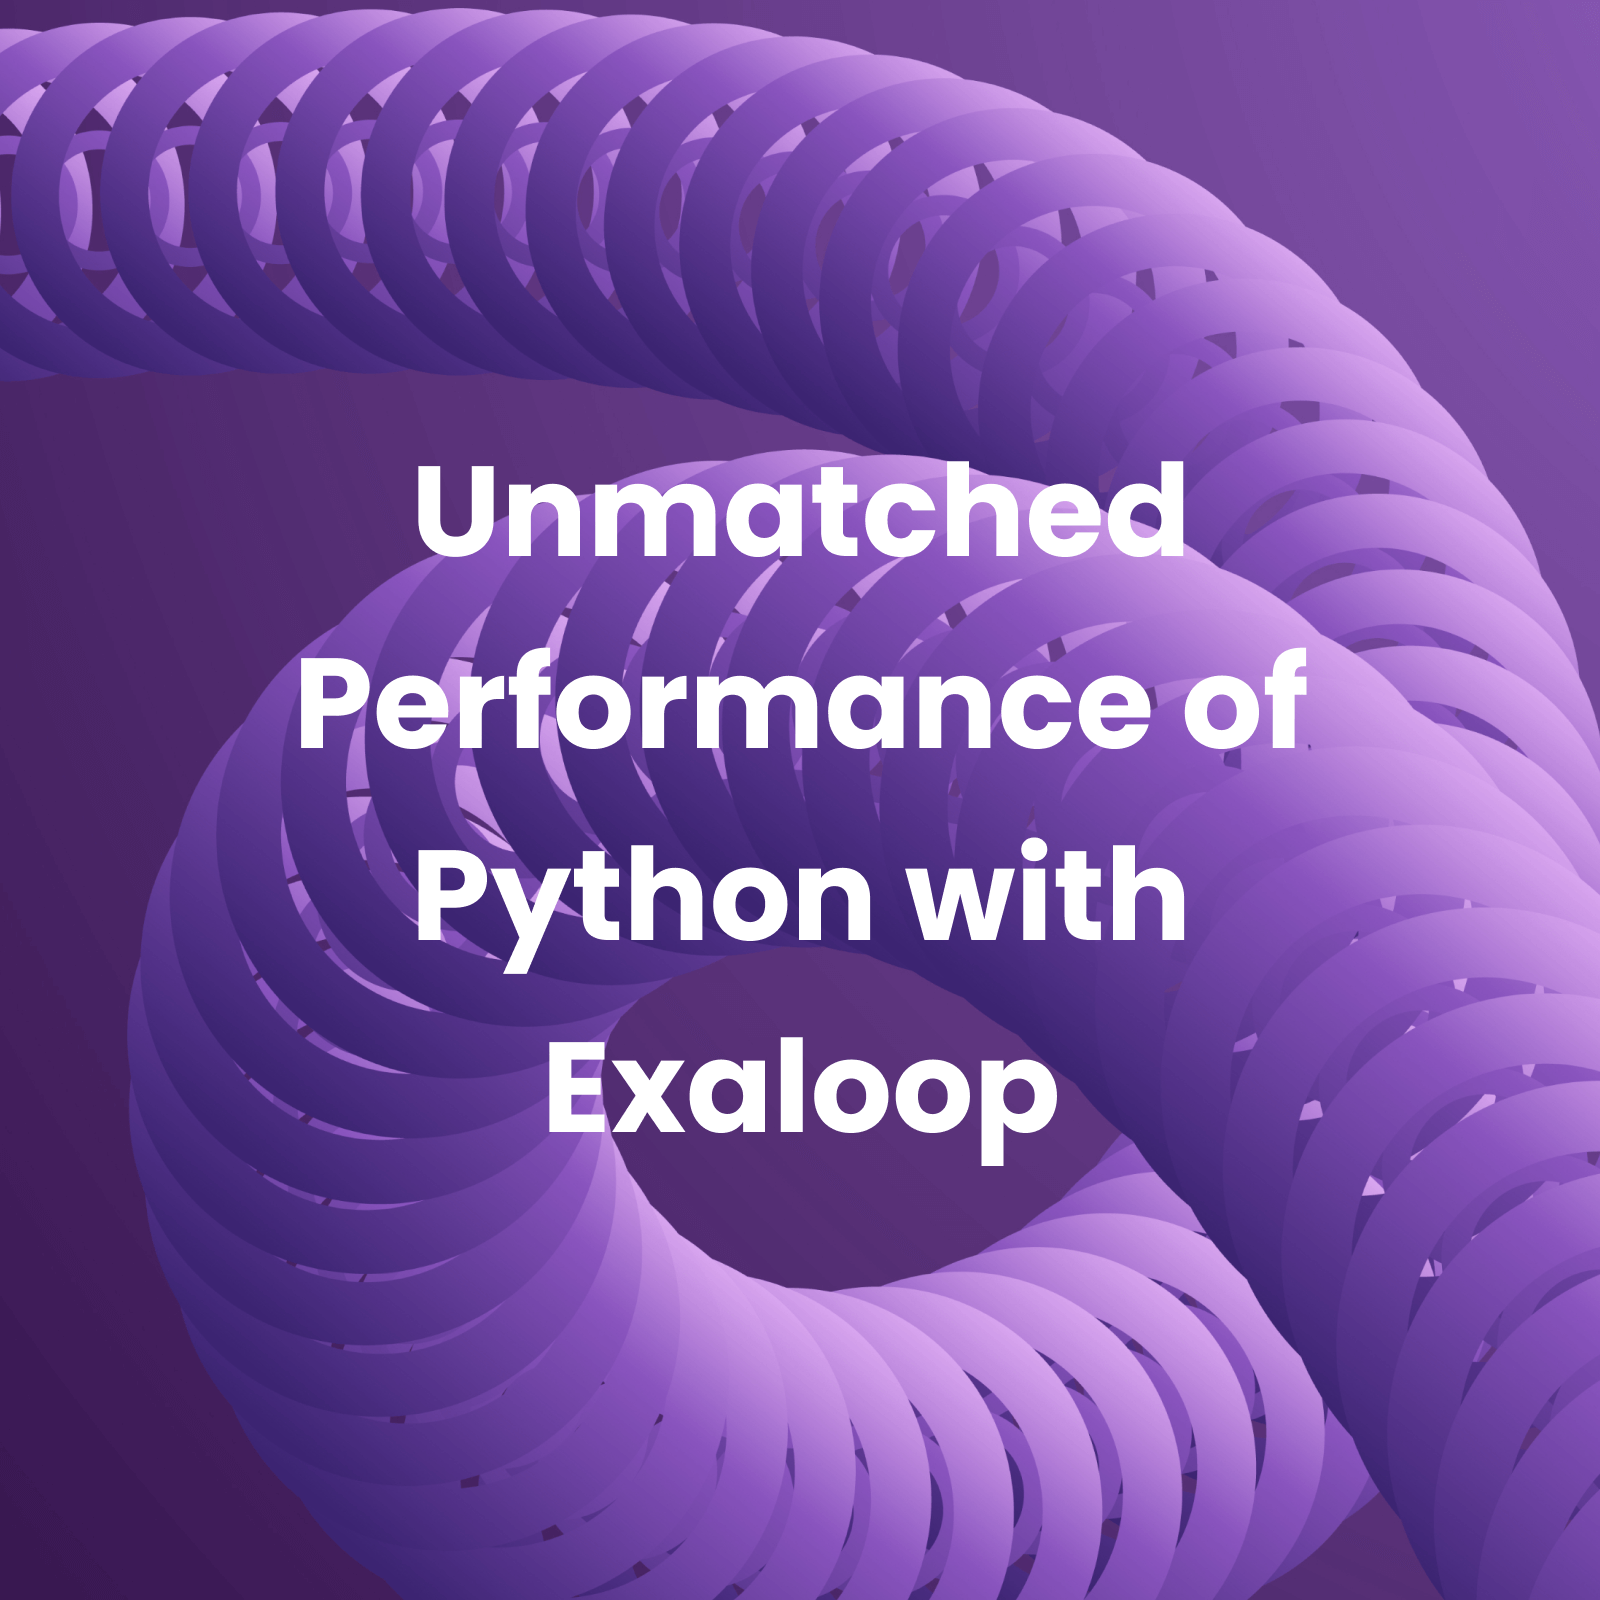 Unmatched Performance of Python with Exaloop